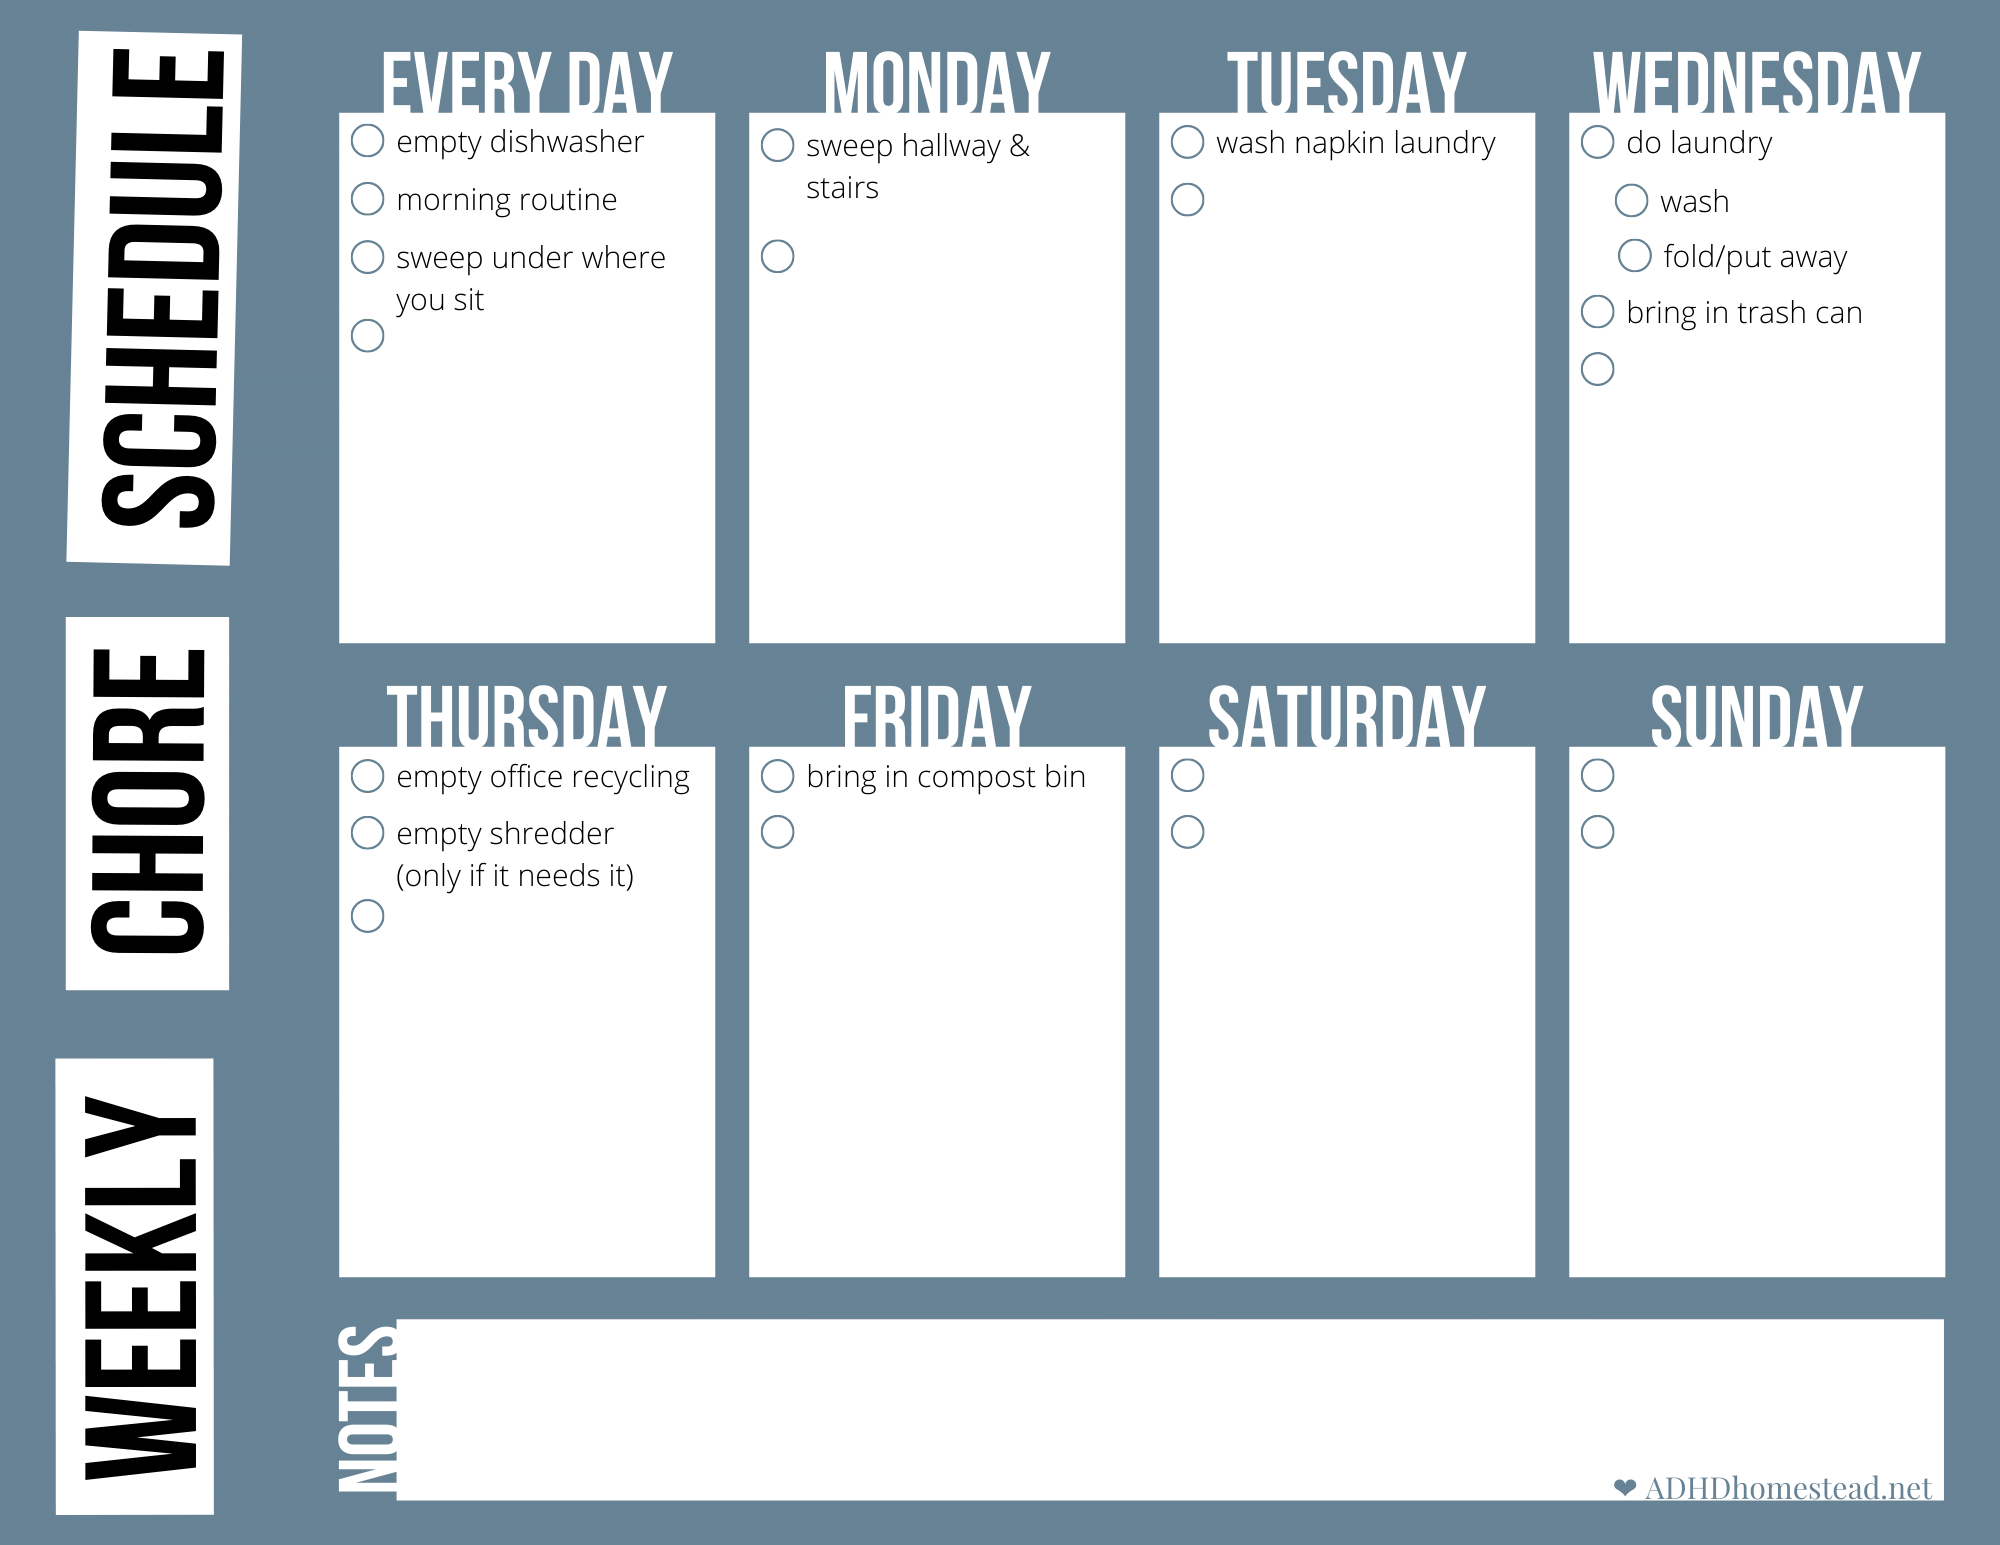 chore-schedule-template-printable-the-adhd-homestead